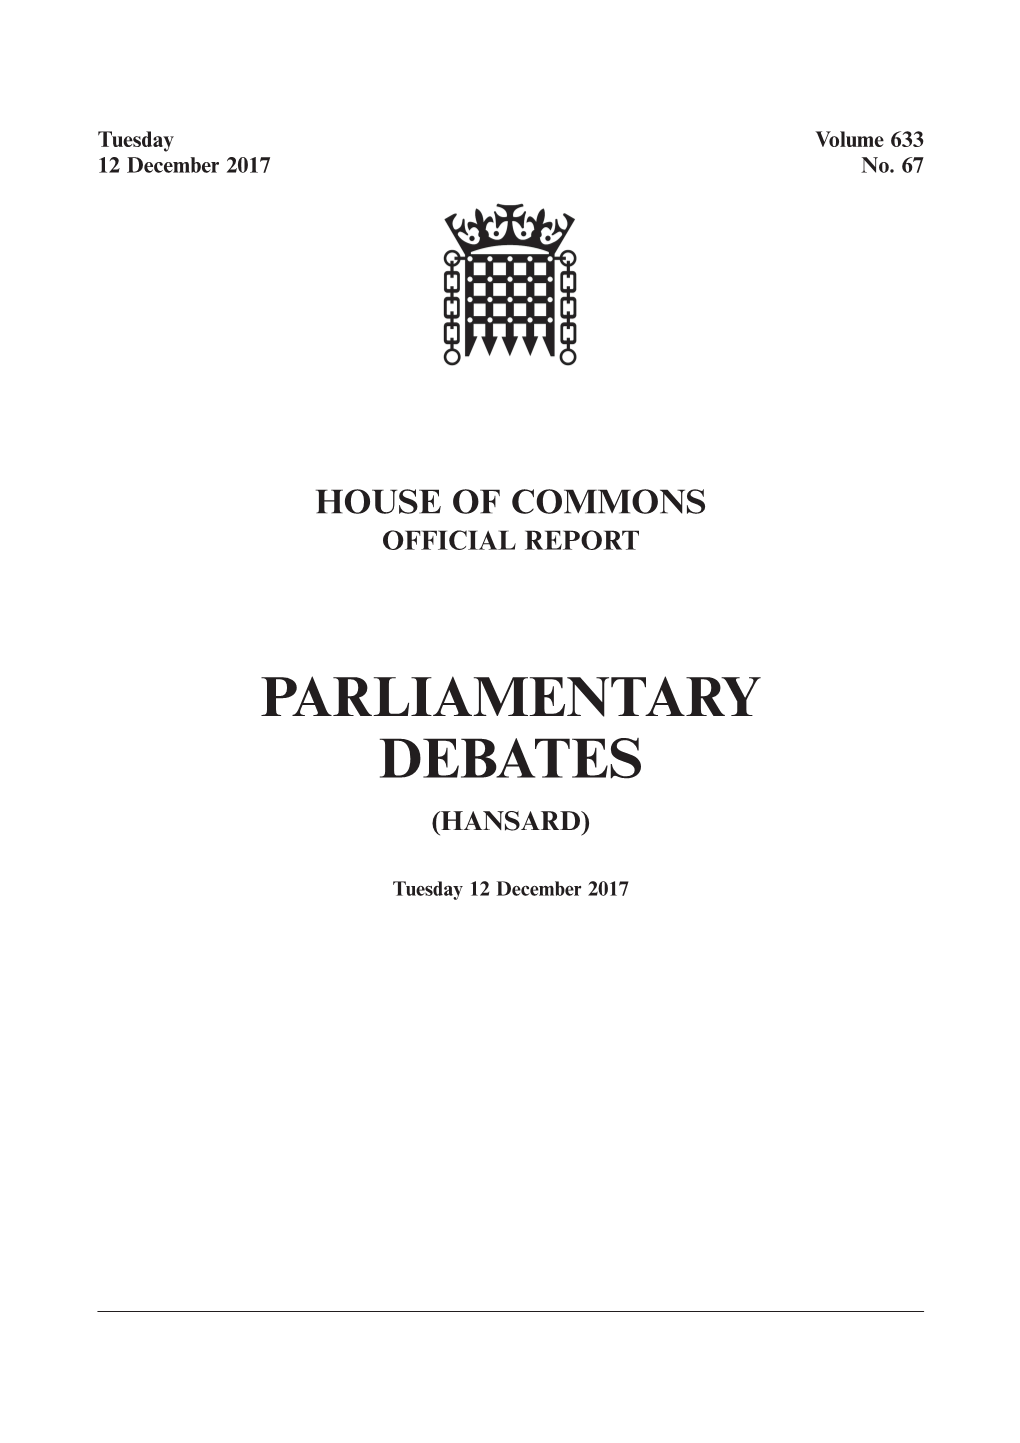 Whole Day Download the Hansard Record of the Entire Day in PDF Format. PDF File, 1.55